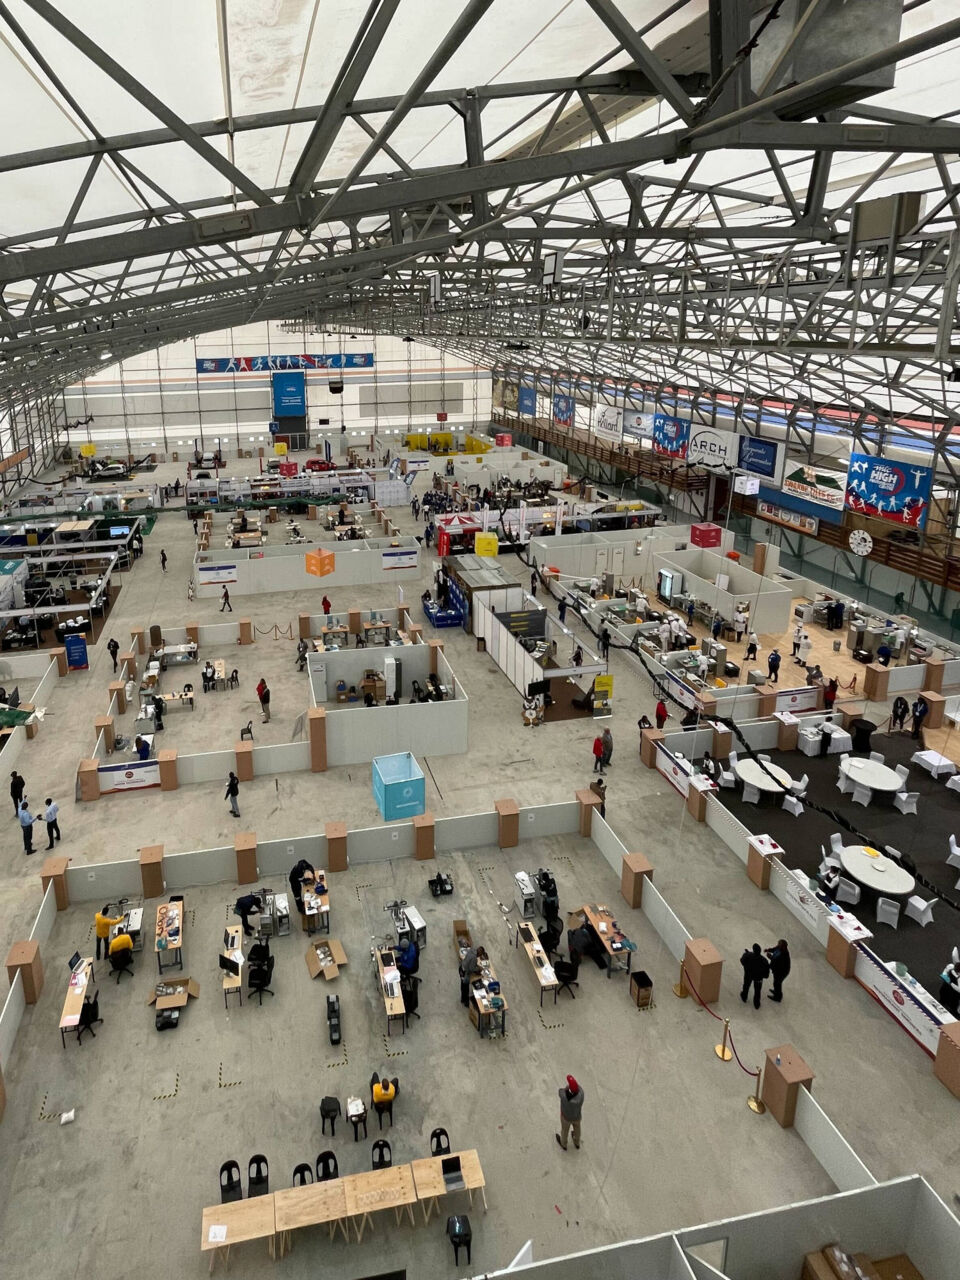 An aerial view of the competition area at The Dome in Swakopmund, Namibia, the venue for WorldSkills Africa Swakopmund 2022.